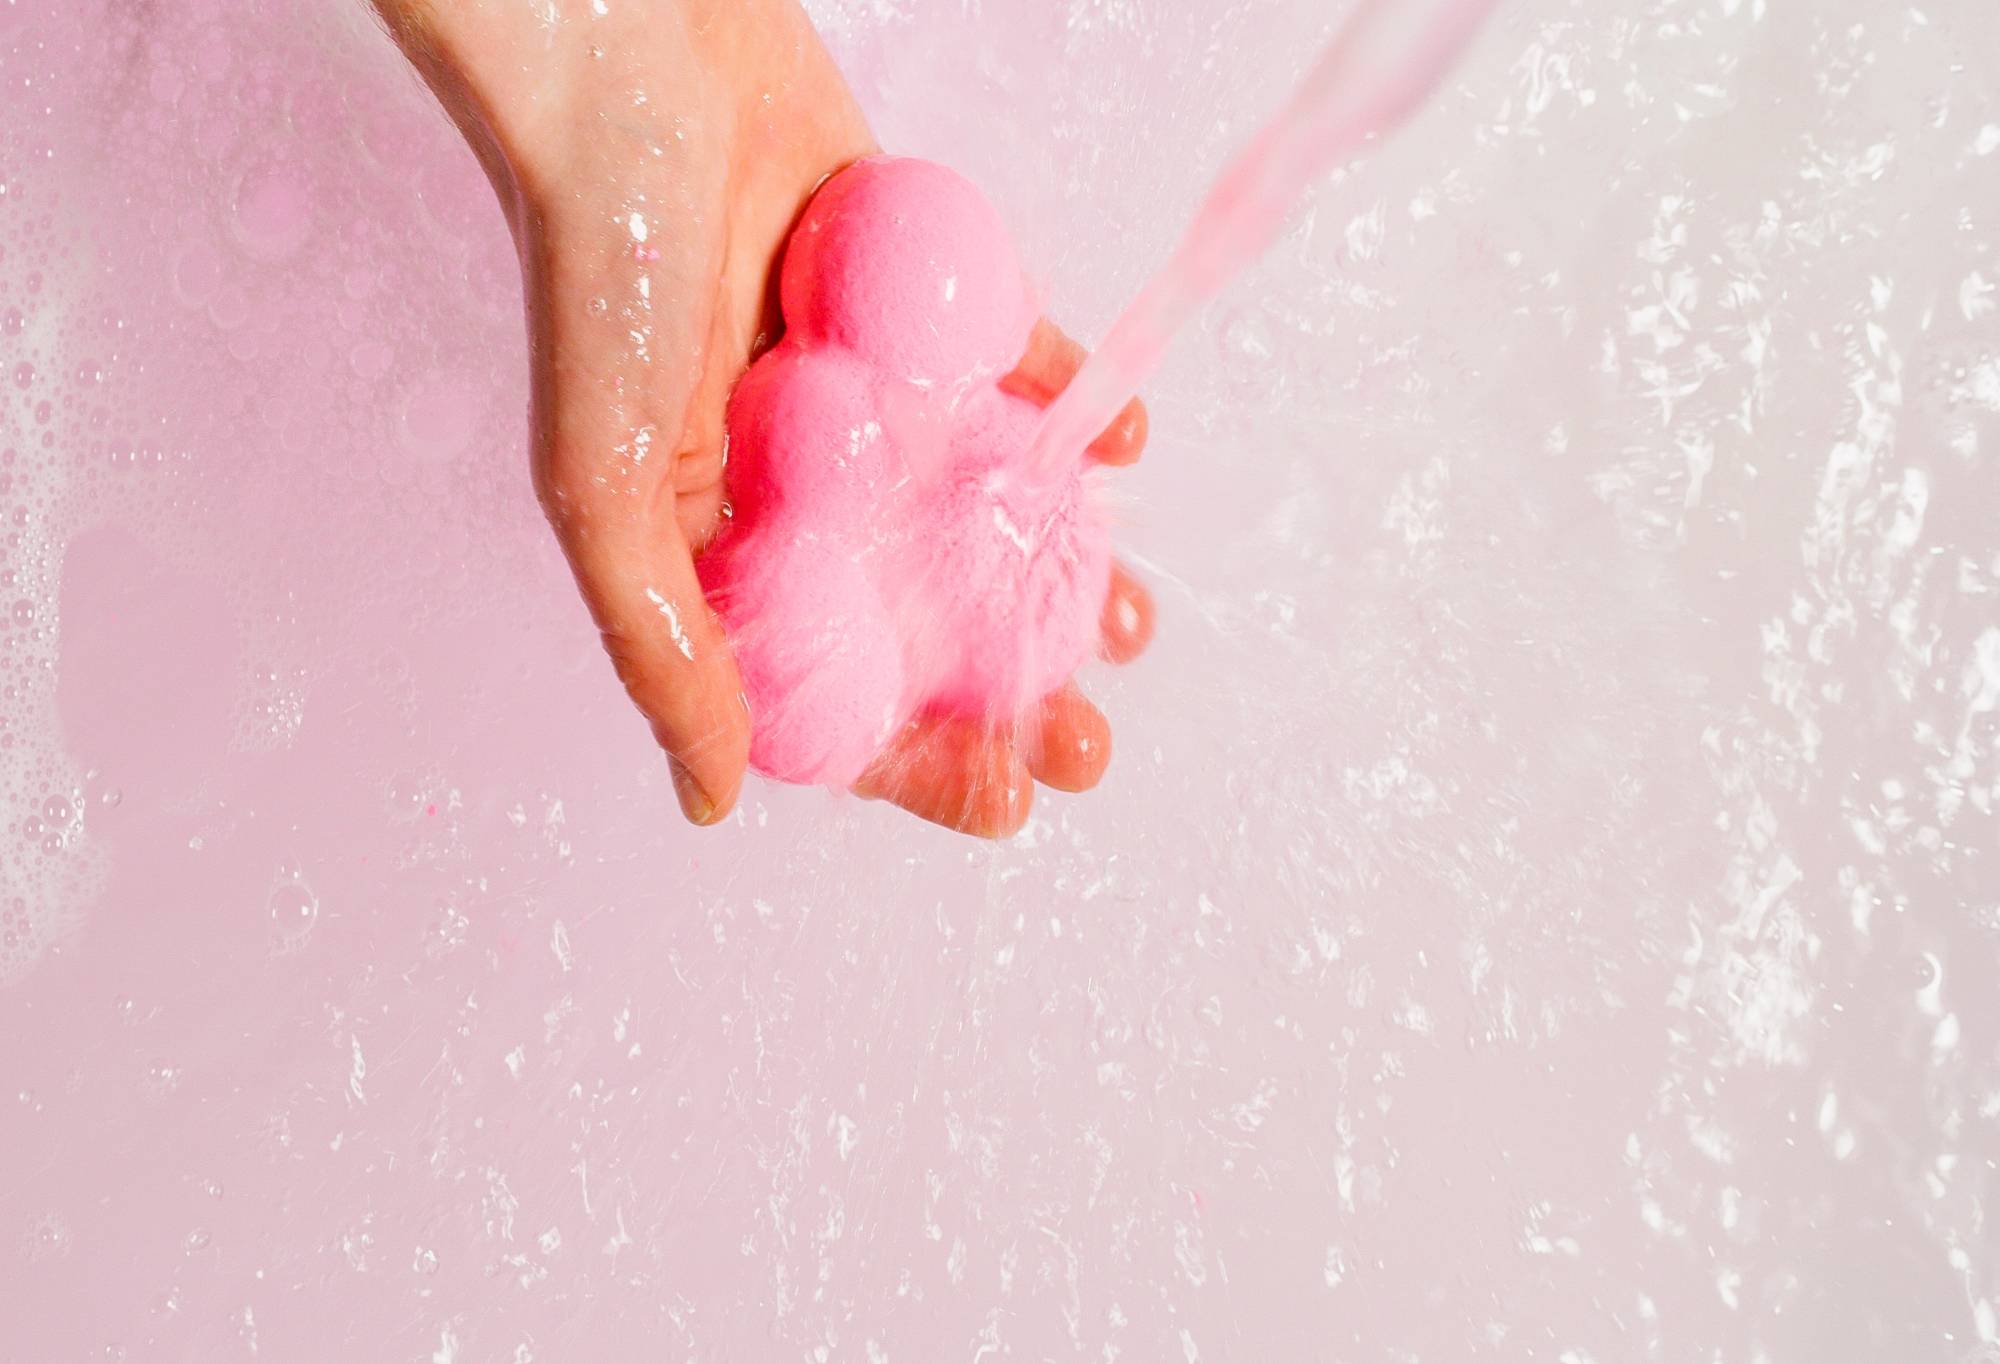 A hand holds the pink Support Bubble and water runs over it above light pink, bubbly water.